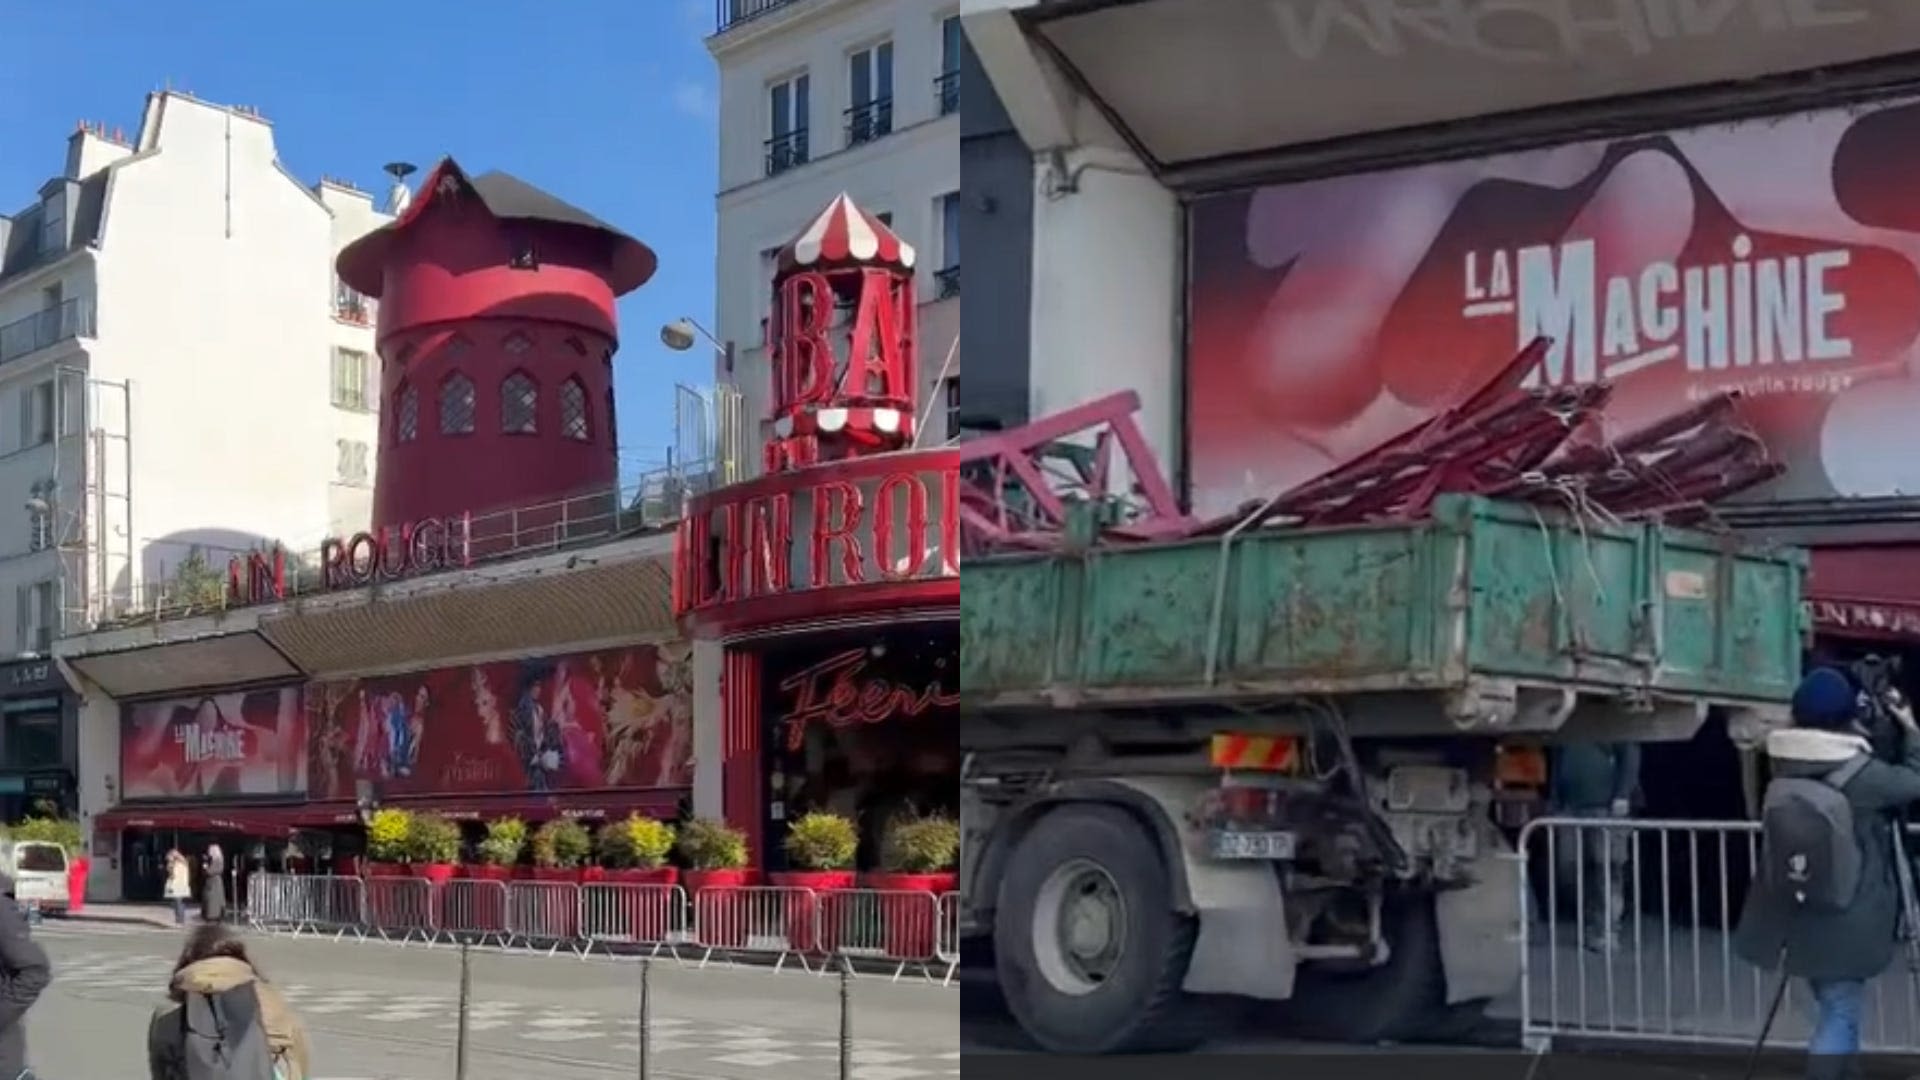 Moulin Rouge windmill sails collapse overnight